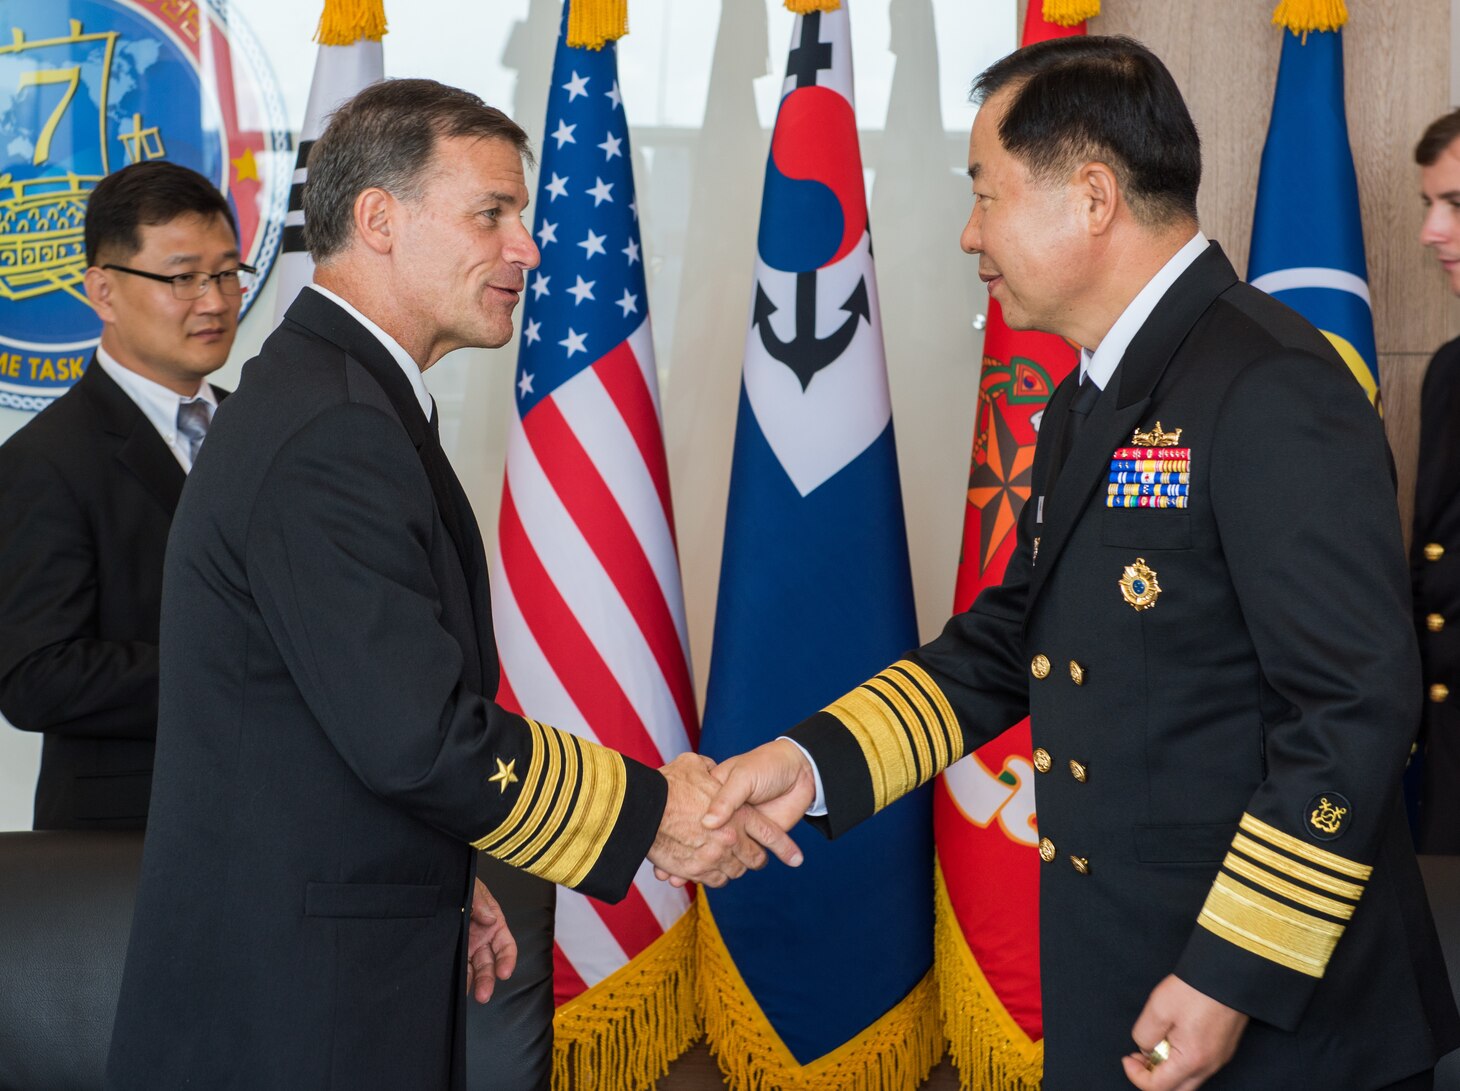 JEJU ISLAND, Republic of Korea (Oct. 11, 2018) Adm. John Aquilino, commander, U.S. Pacific Fleet, shakes hands with Republic of Korea (ROK) Chief of Naval Operations (CNO) Adm. Sim, Seung-seob during an office call in Jeju. Aquilino is visiting the ROK to observe the 2018 ROK International Fleet review as well as attend the 2018 Western Pacific Naval Symposium being hosted by the ROK Navy.